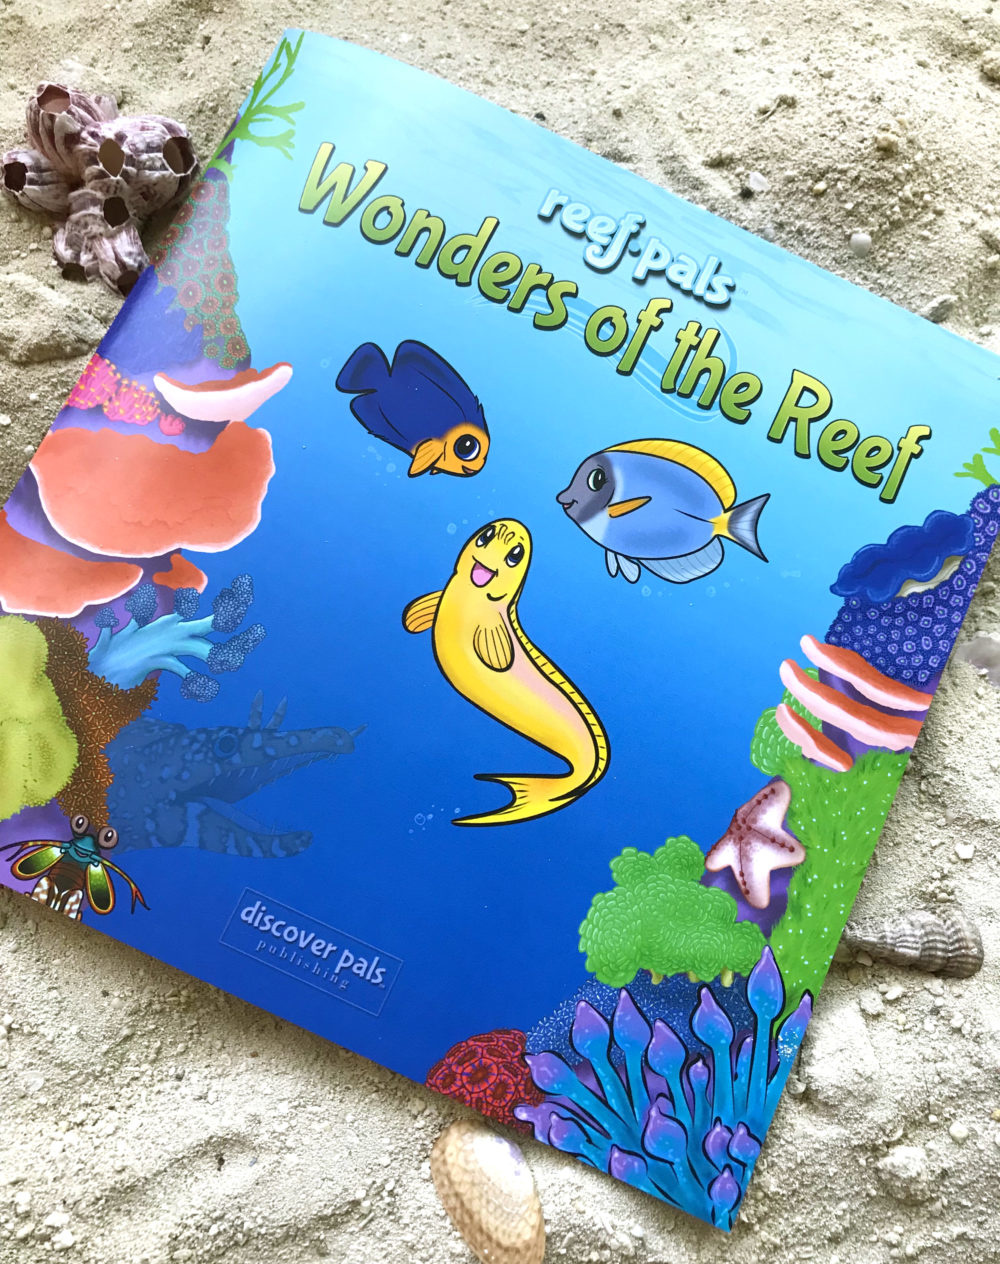 Discover Pals Wonders of the Reef Book